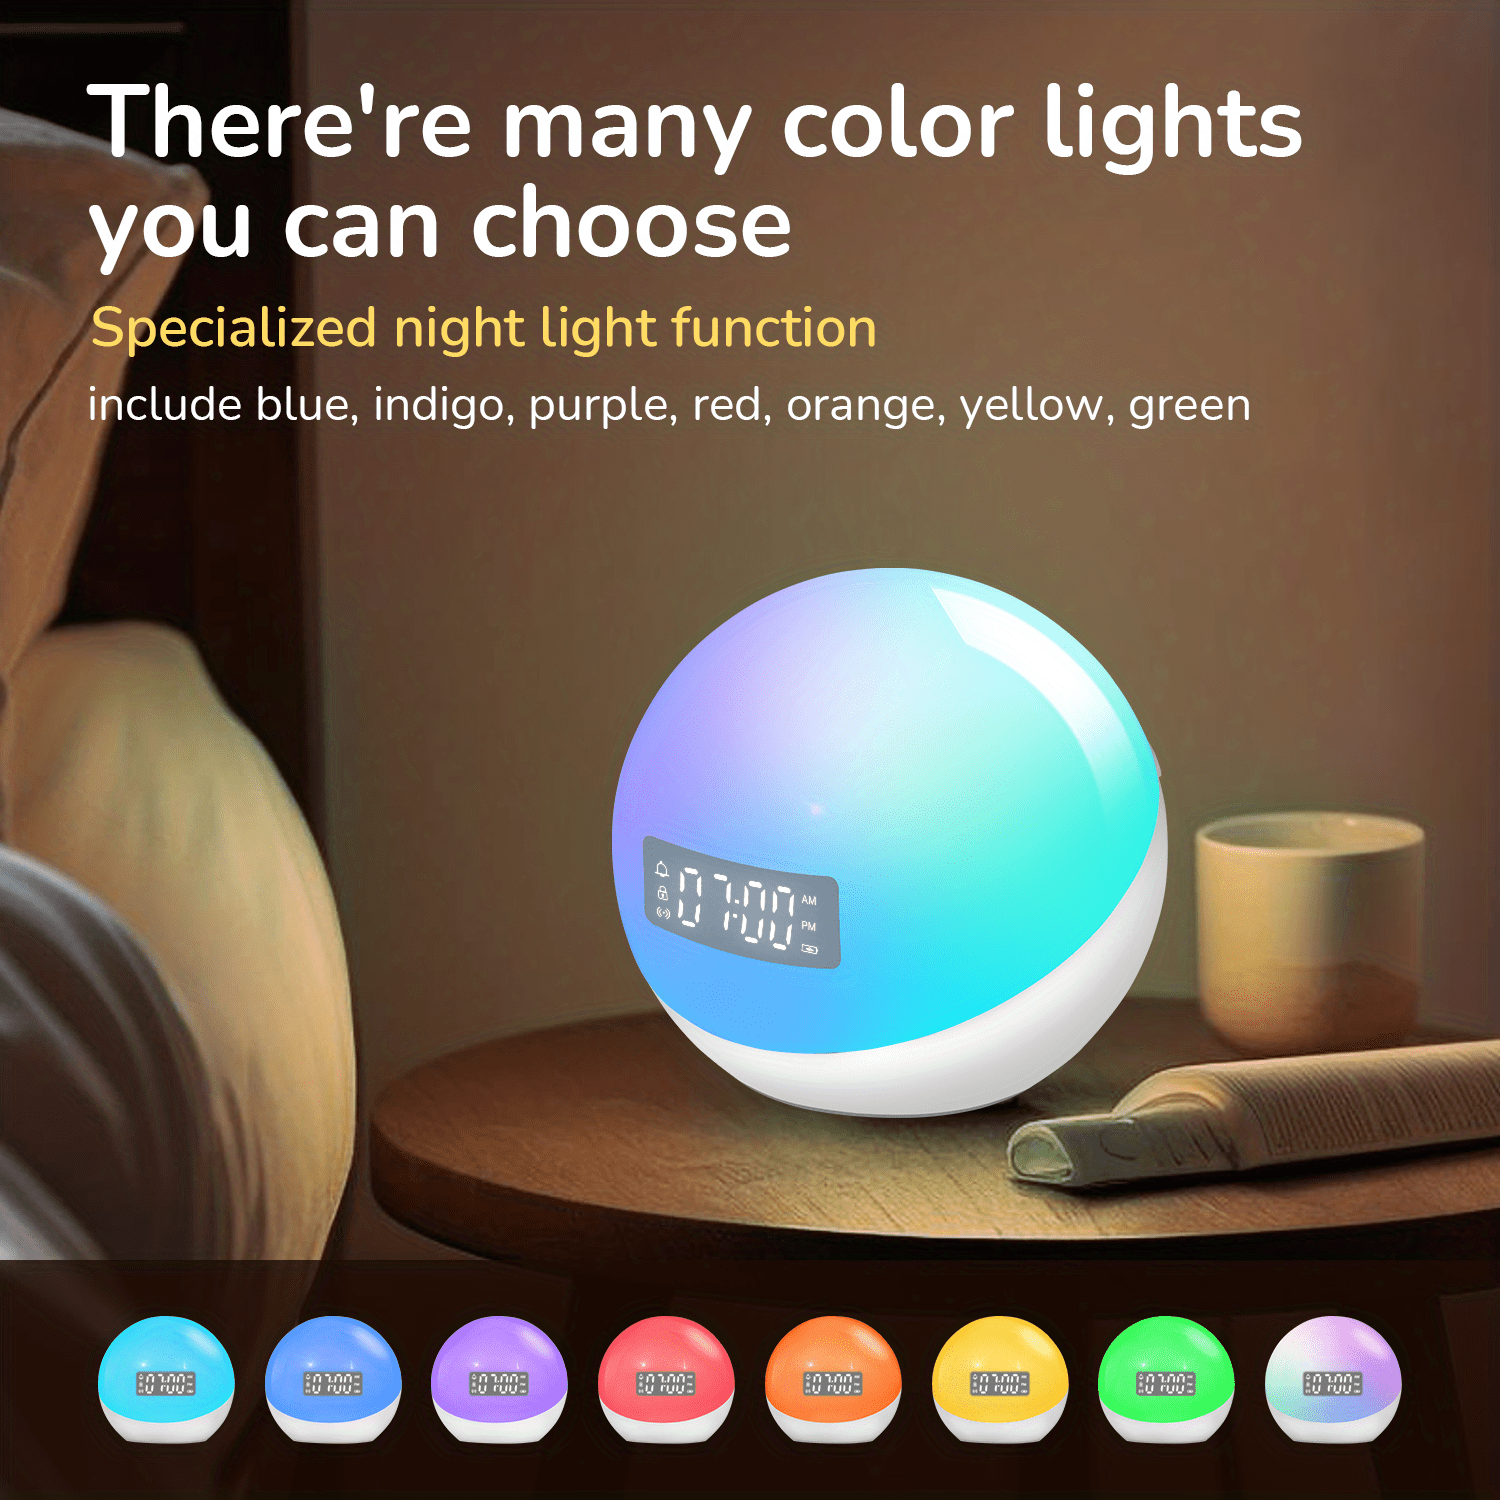 White Noise Machine Wake Up Light Sunrise Alarm Clock with Sunrise Sunset  Simulation for Heavy Sleepers Kids Bedroom Dual Alarms Snooze Sound Brown